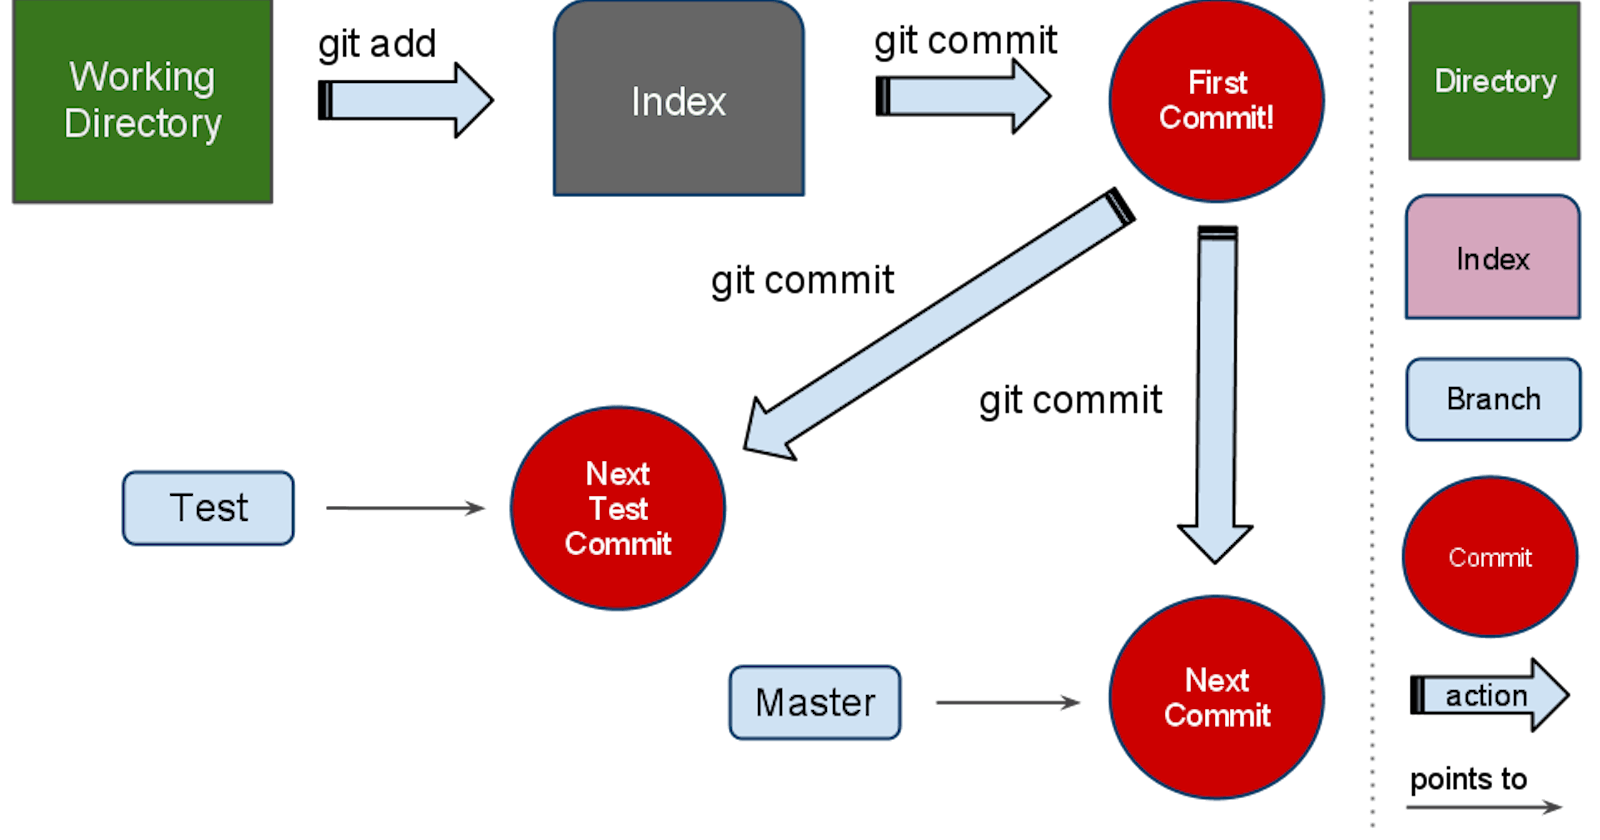 6. Getting Started With GIT- Part 1